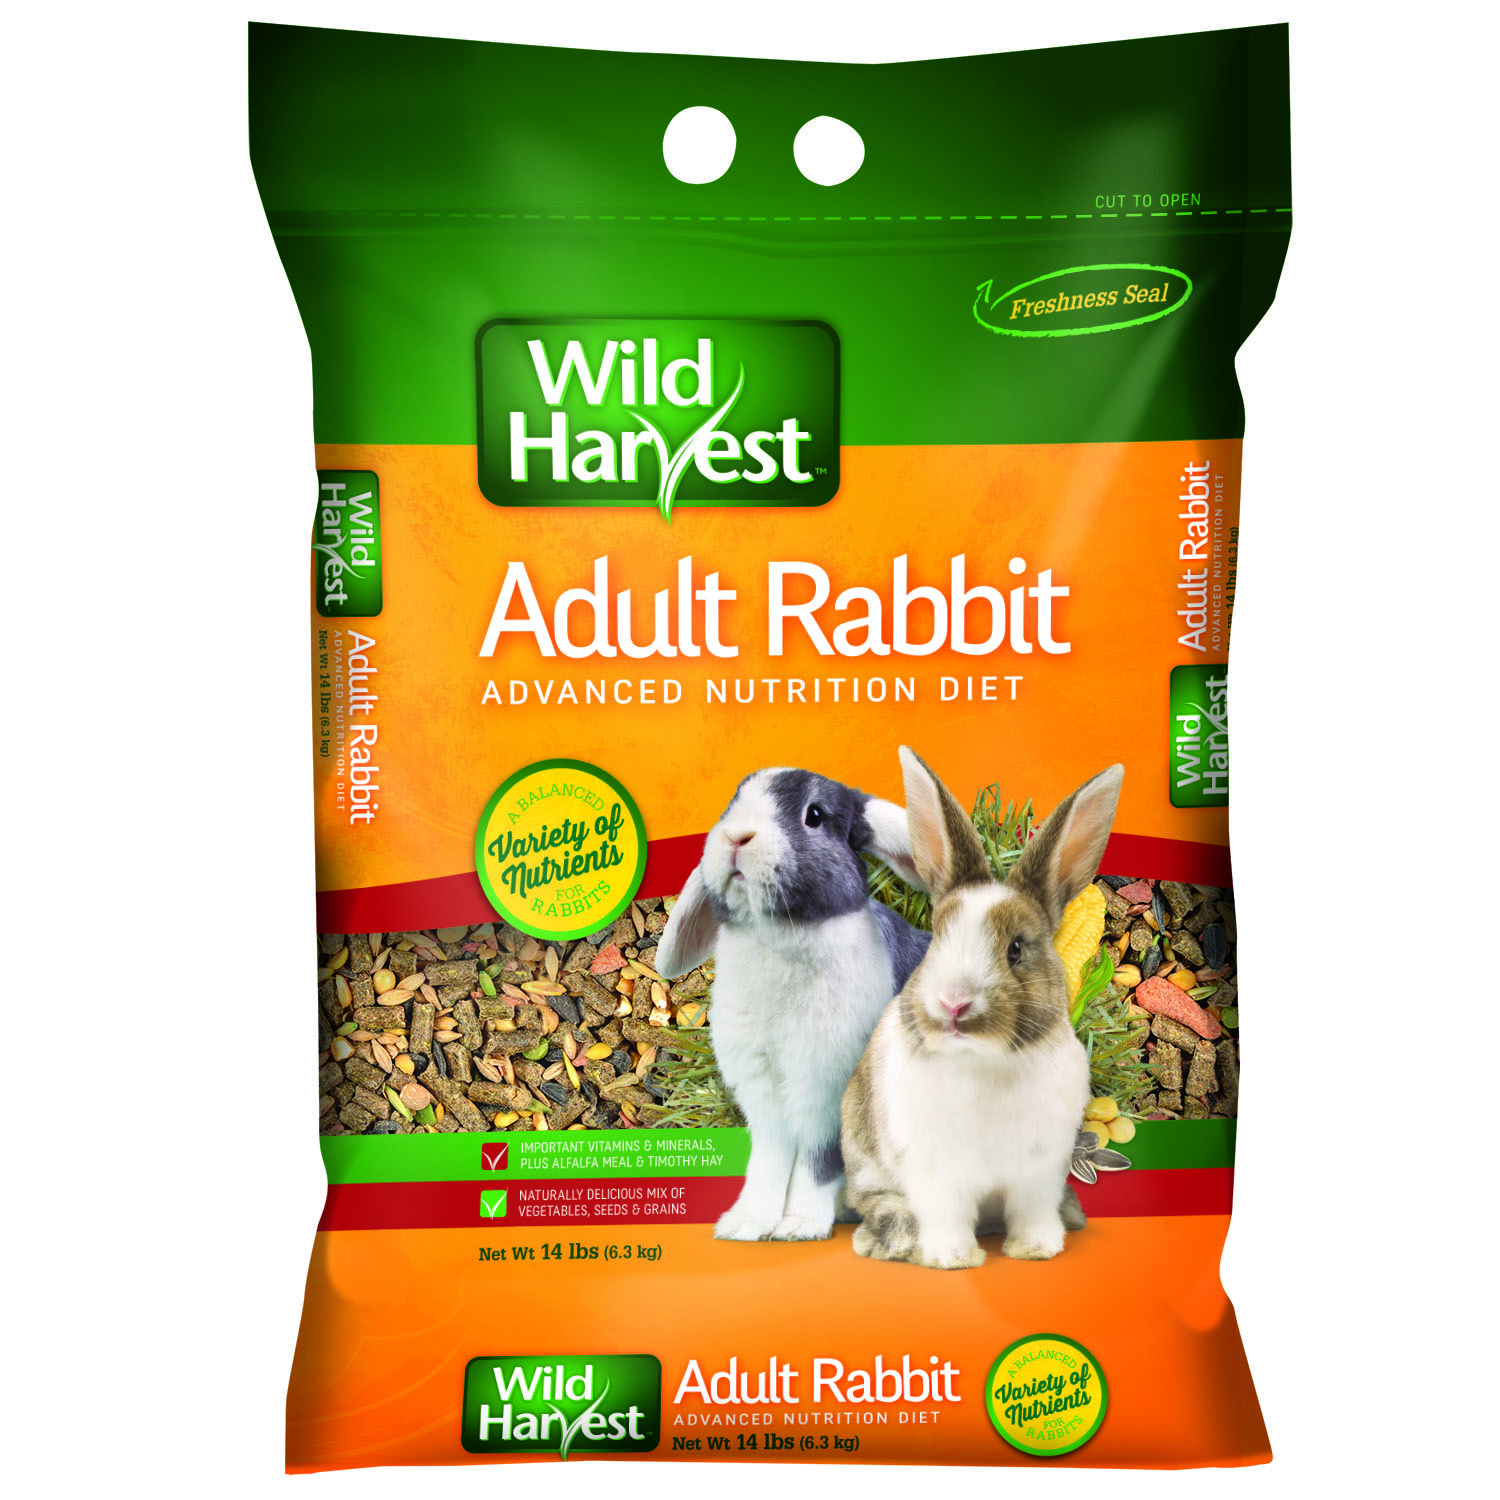 Wild Harvest Advanced Nutrition Adult Rabbit 14 Pounds, Complete and Balanced Diet - image 3 of 7